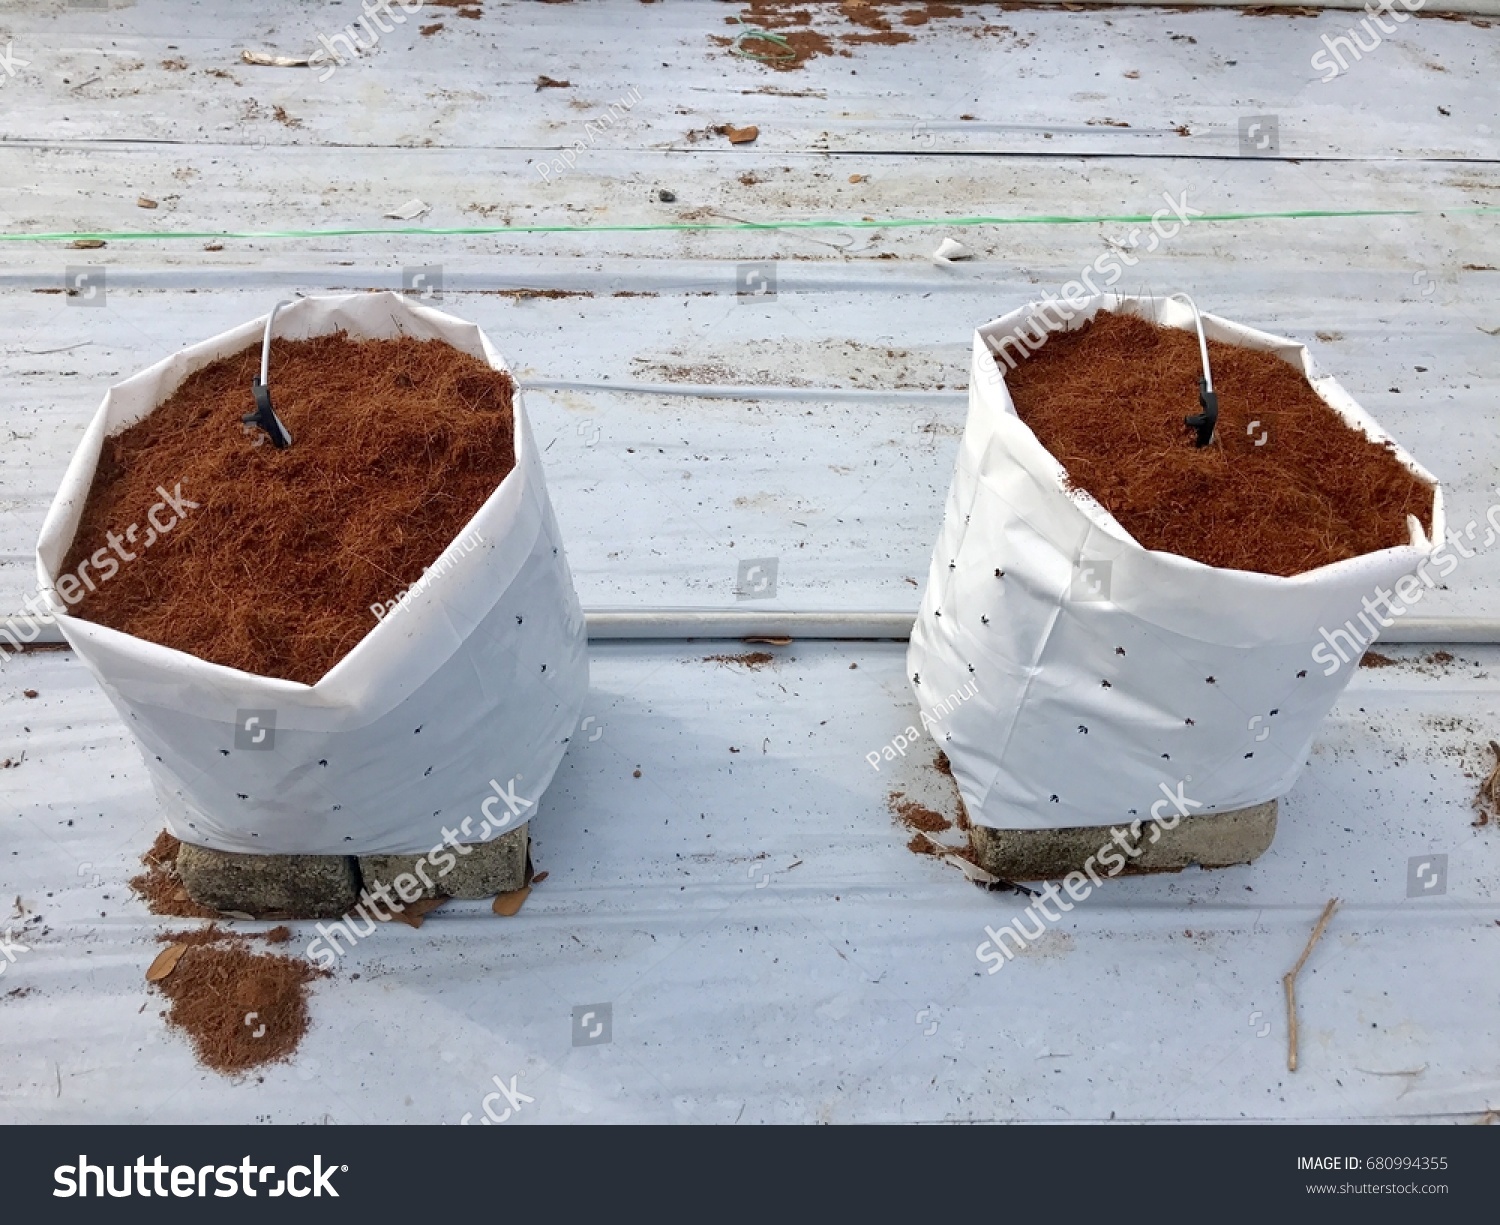 Coconut soil in bag for fertigation farm , Fertigation is related to chemigation, the injection of chemicals into an irrigation system. #680994355